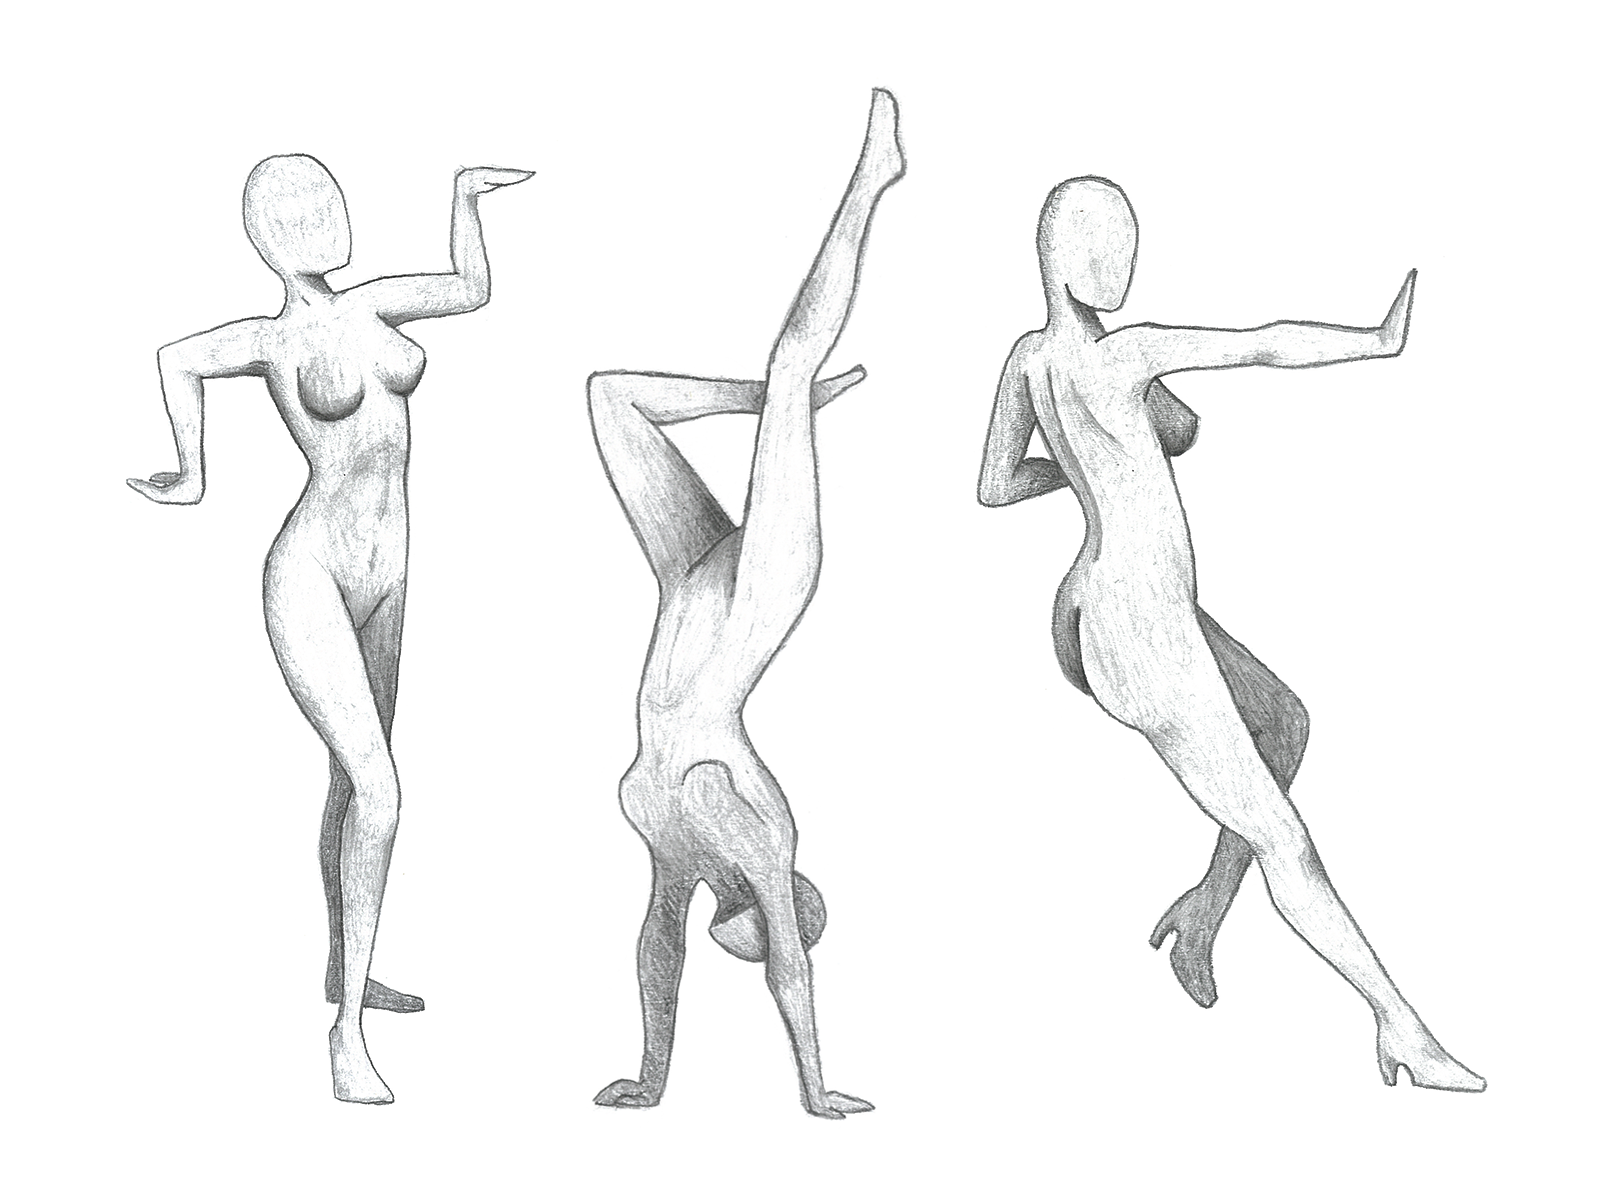 How to Draw Anime Poses - Anime Girl, Body, Cute Poses